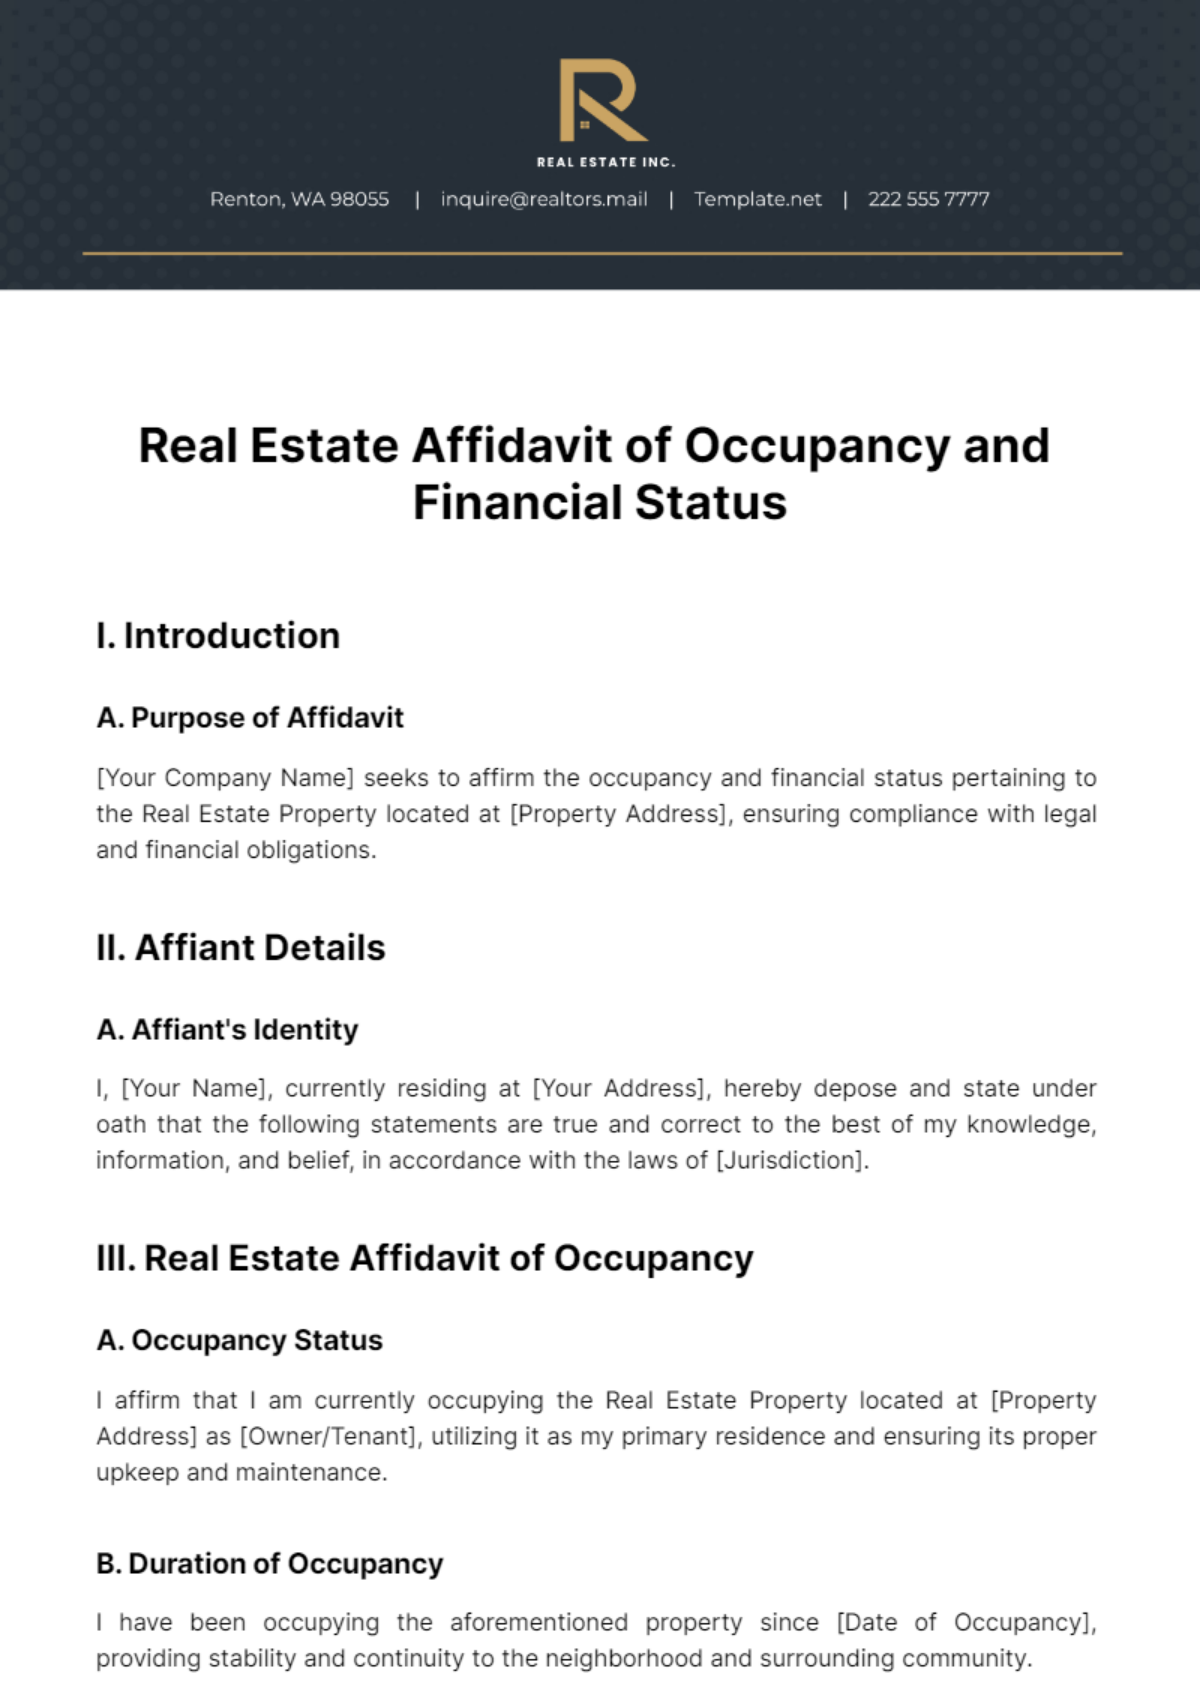 Real Estate Affidavit of Occupancy and Financial Status Template